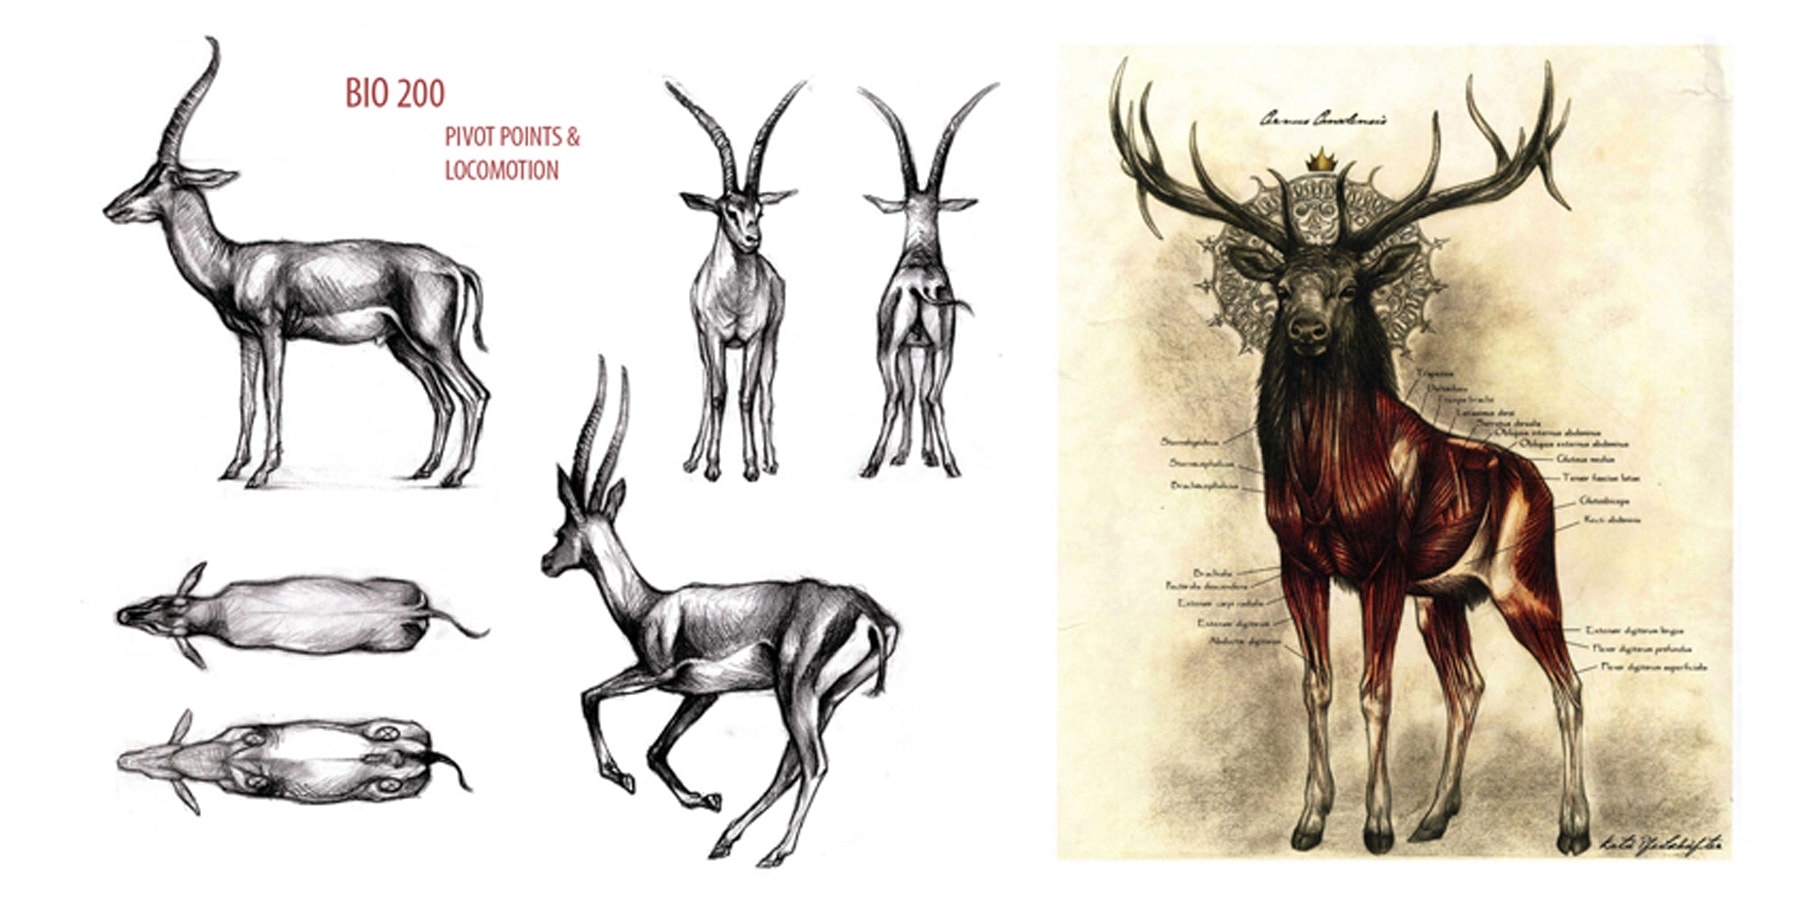 Kate Pfeilschiefter's composite creature assignment for anatomy class, featuring multiple views of an animal